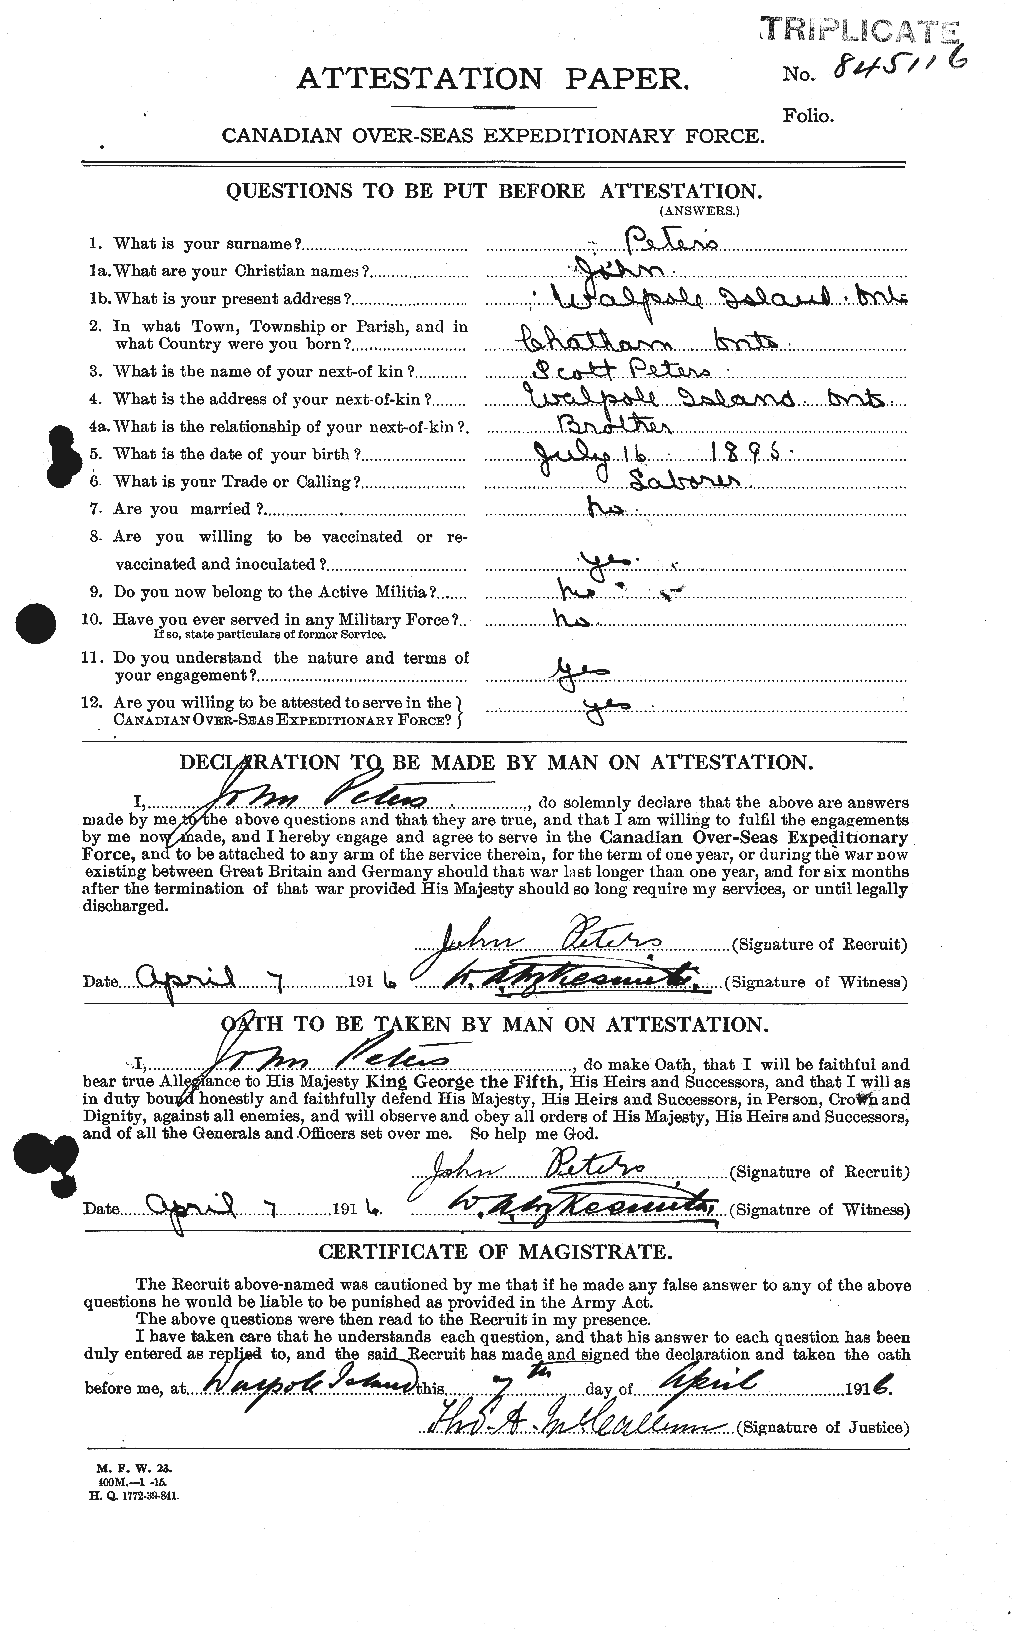 Personnel Records of the First World War - CEF 575542a